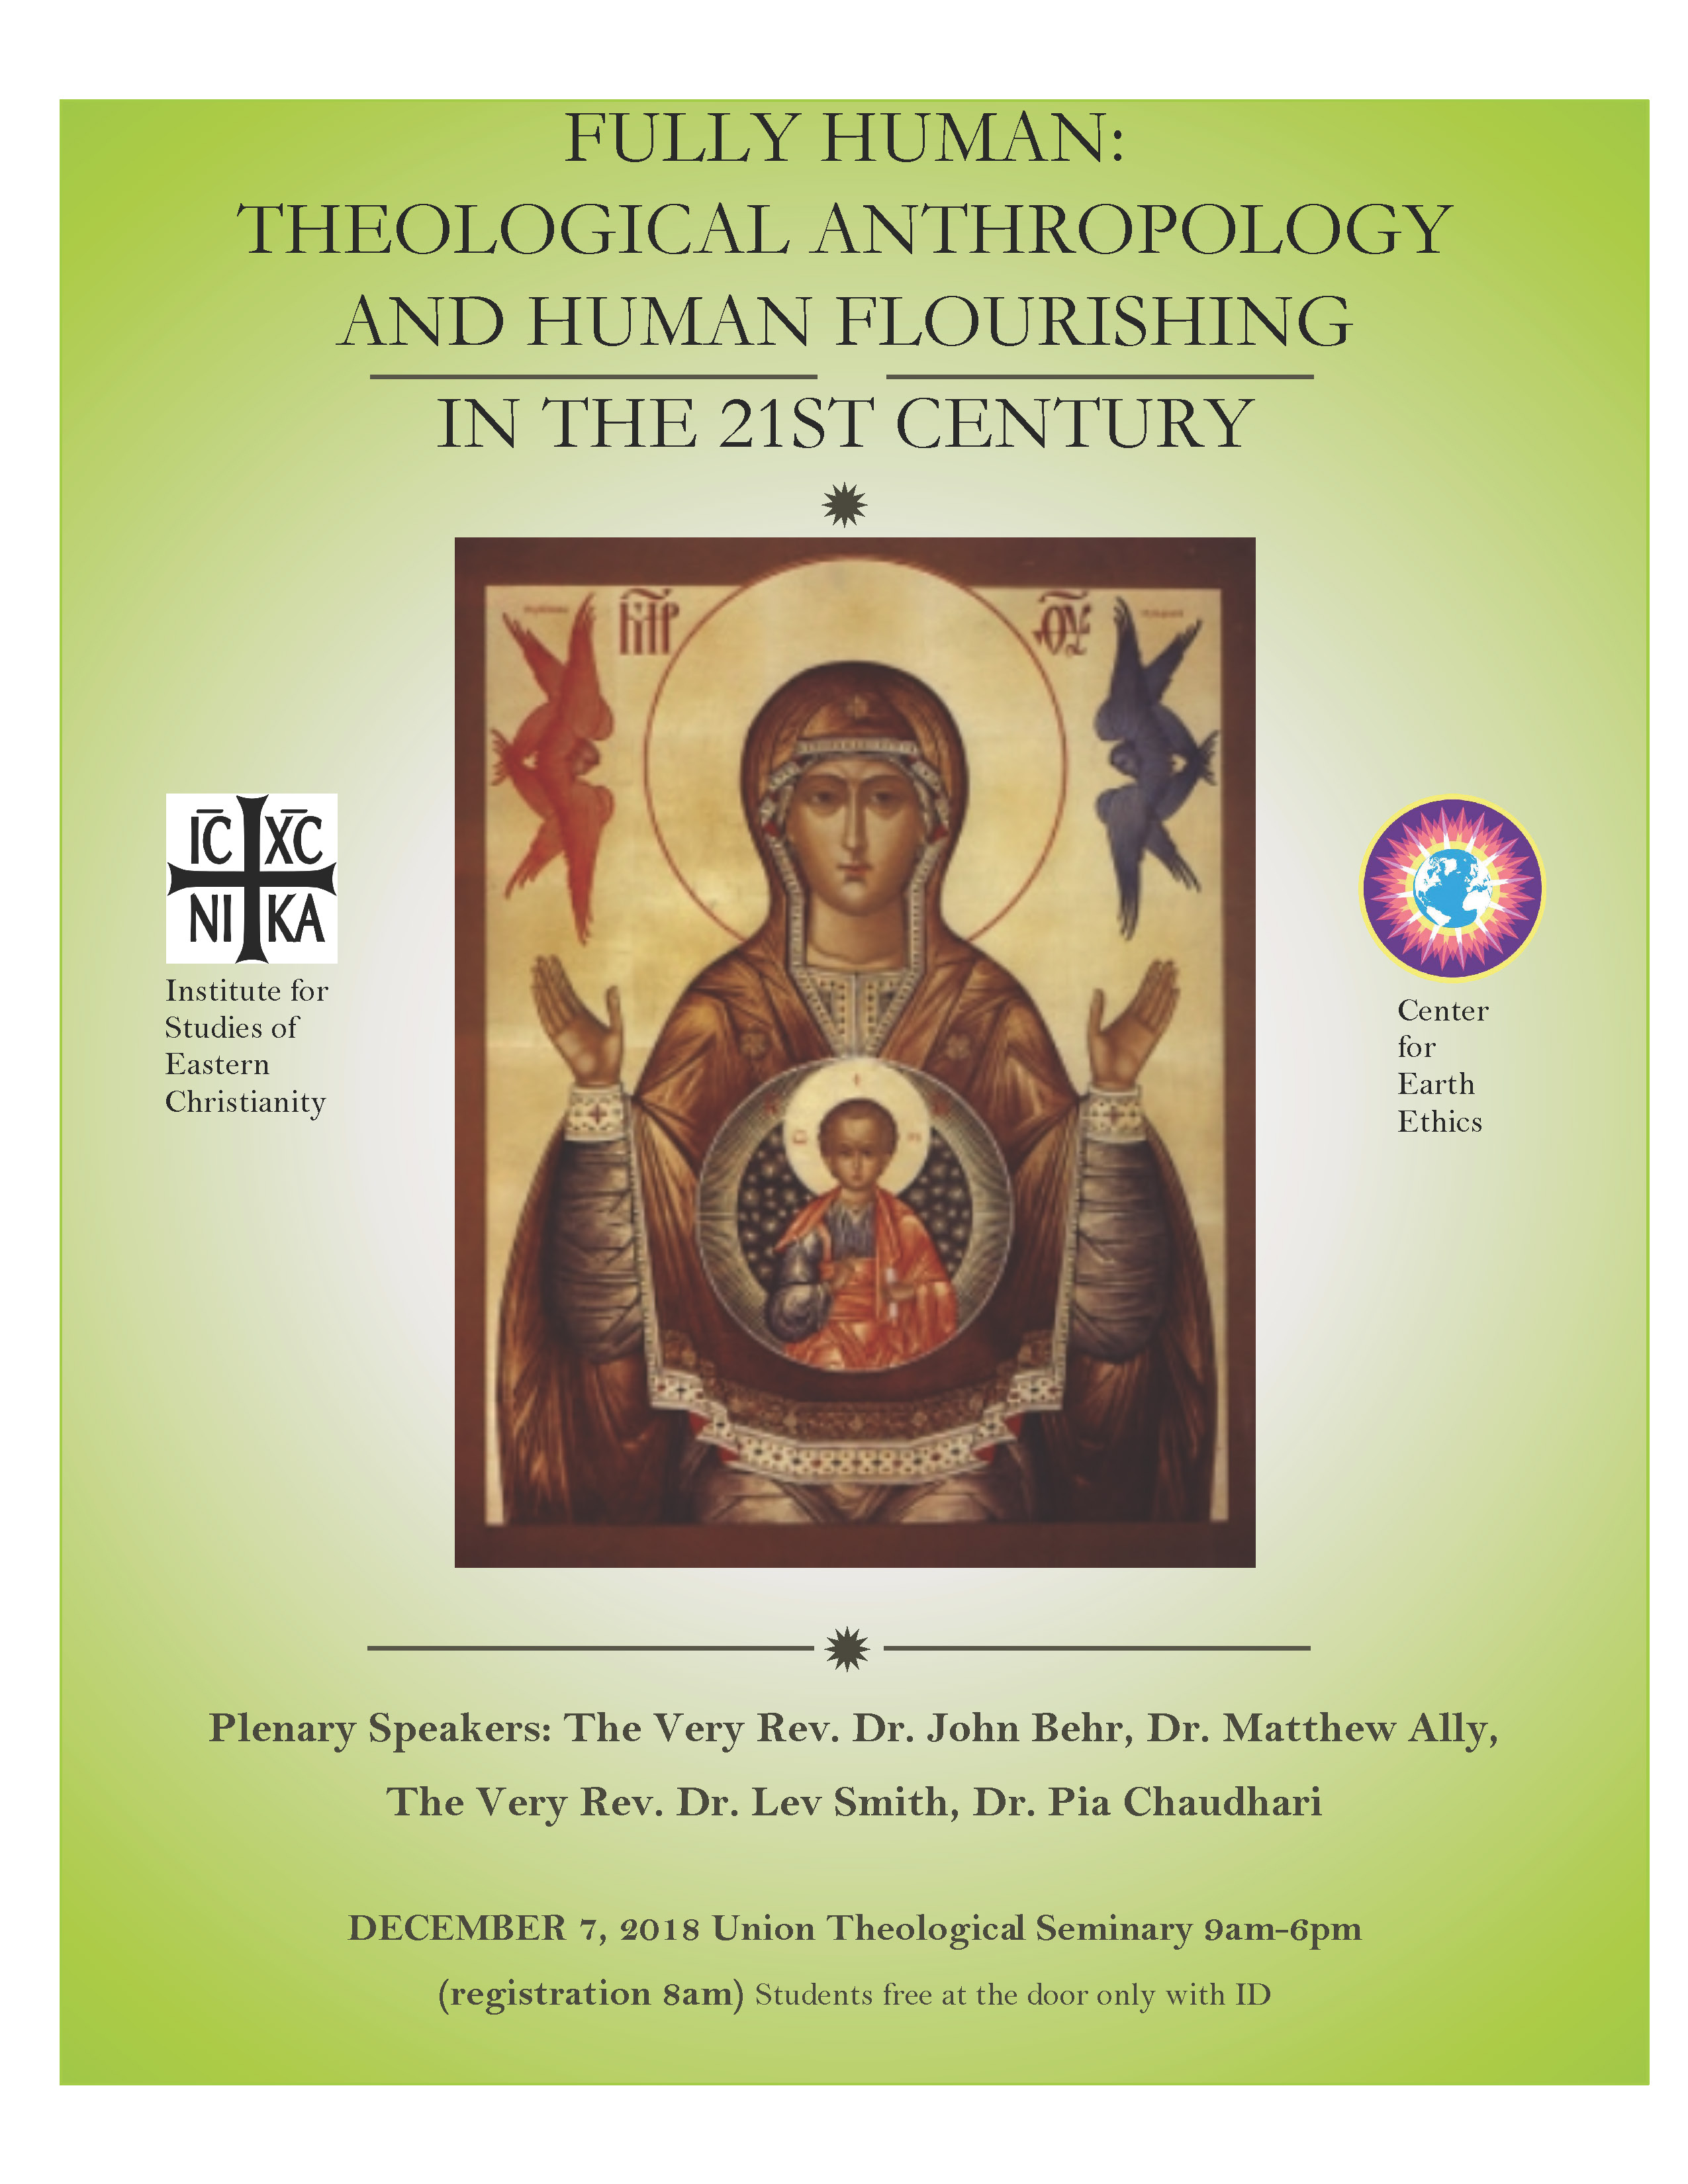 Fully Human: Theological Anthropology and Human Flourishing in the 21st Century @ Union Theological Seminary | New York | New York | United States